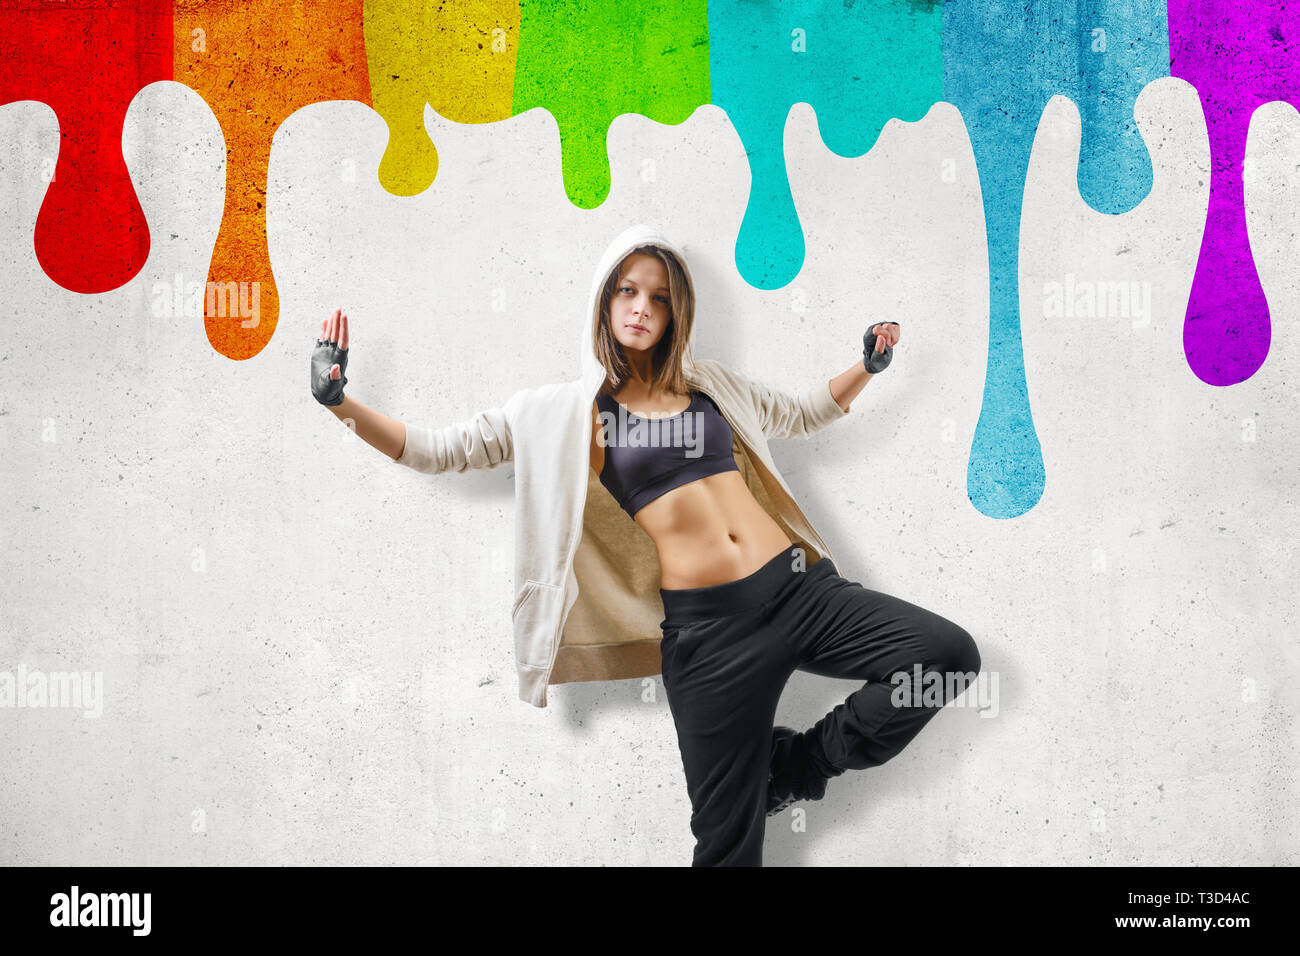 Street dance young girl dancing on rainbow colorful wall background Stock Photo